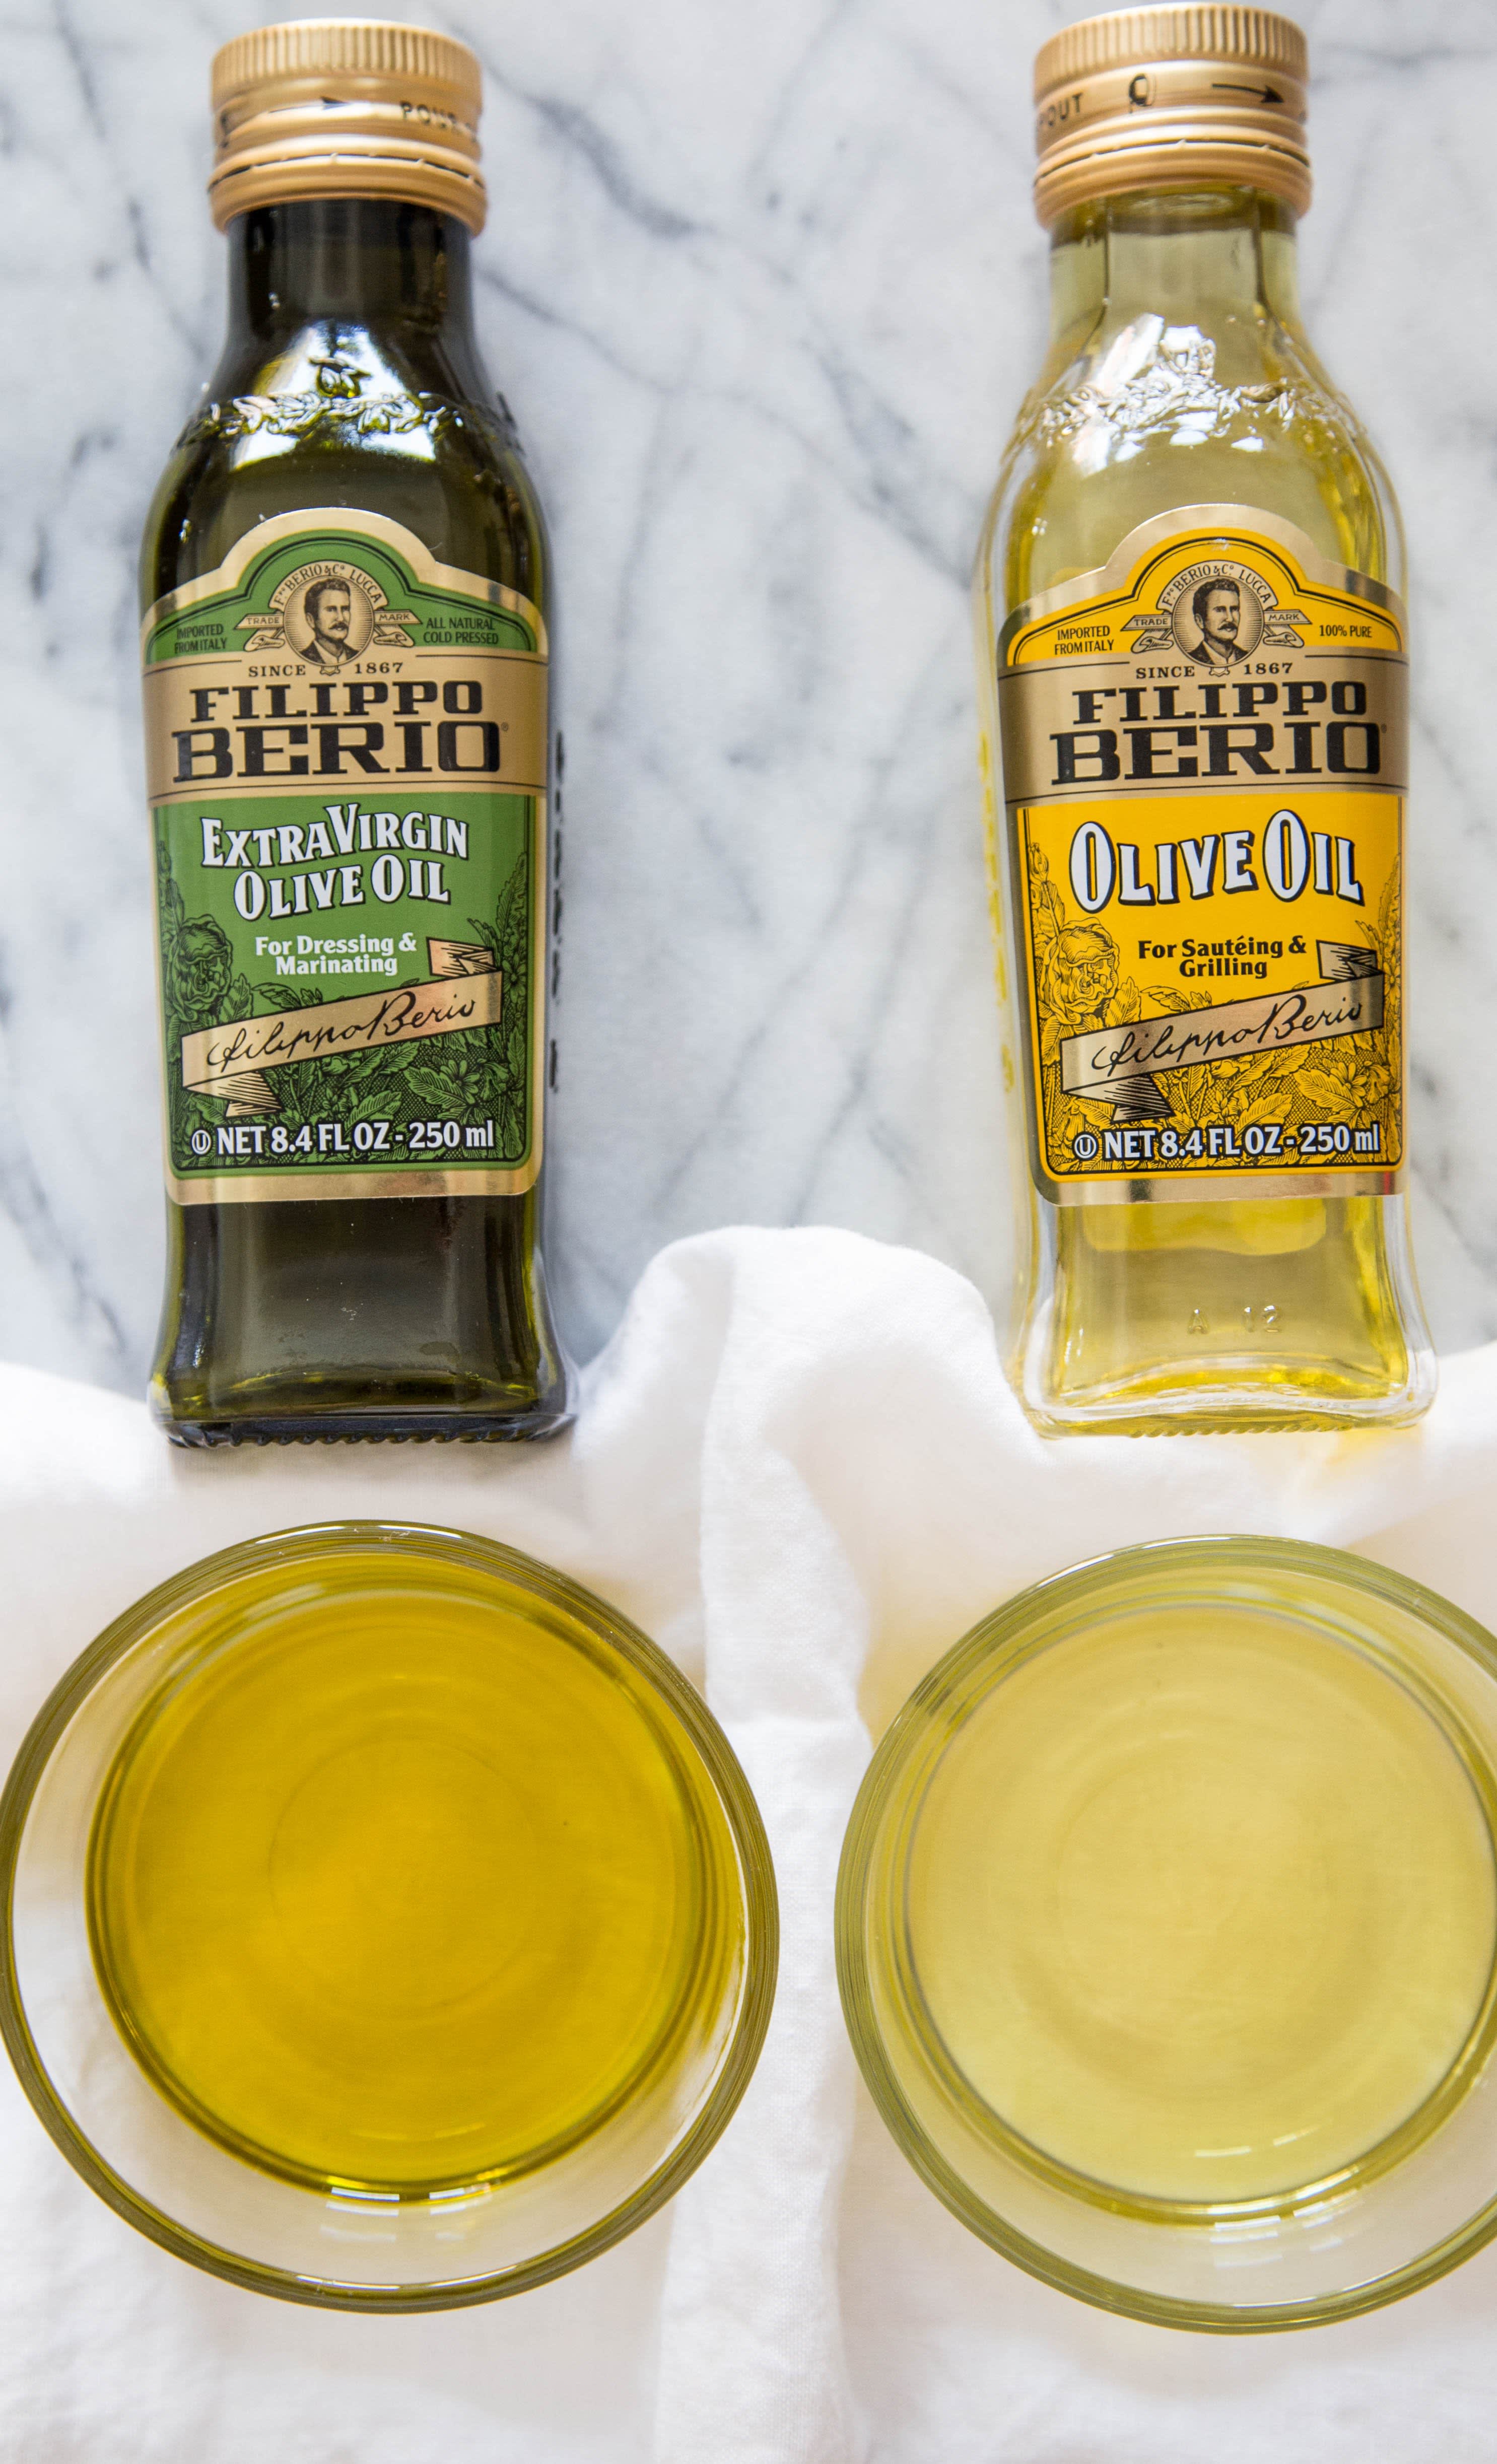 Regular Olive Oil vs Extra-Virgin Olive Oil: What's the Difference